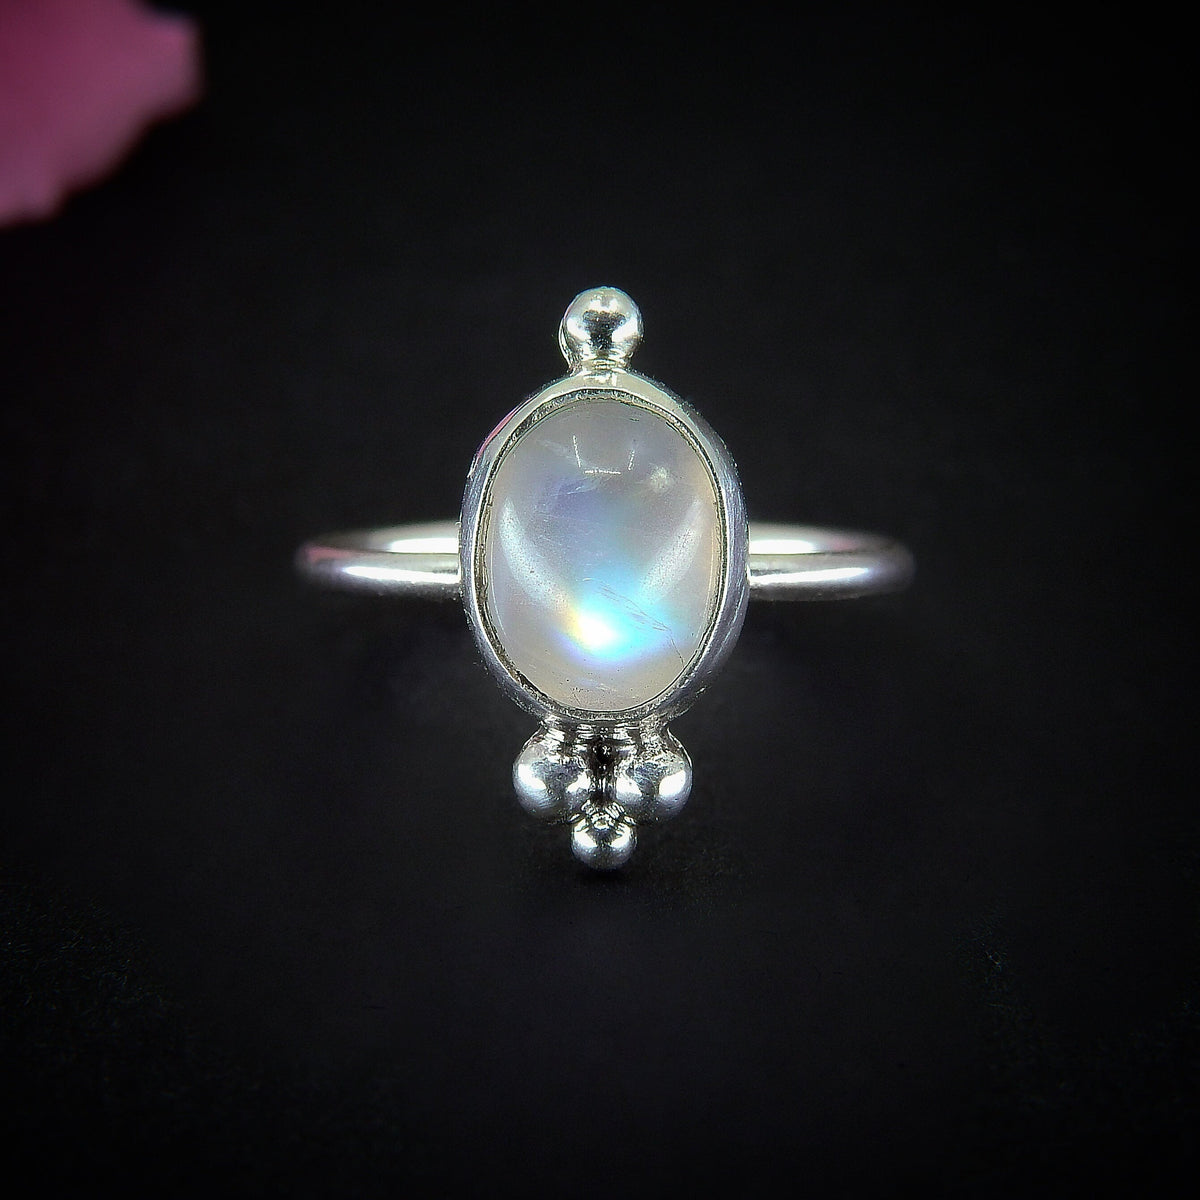 Moonstone Ring - Size 4 - Sterling Silver - Rainbow Moonstone Statement Ring - Blue Flash Moonstone Jewllery - Dainty Moonstone Ring OOAK